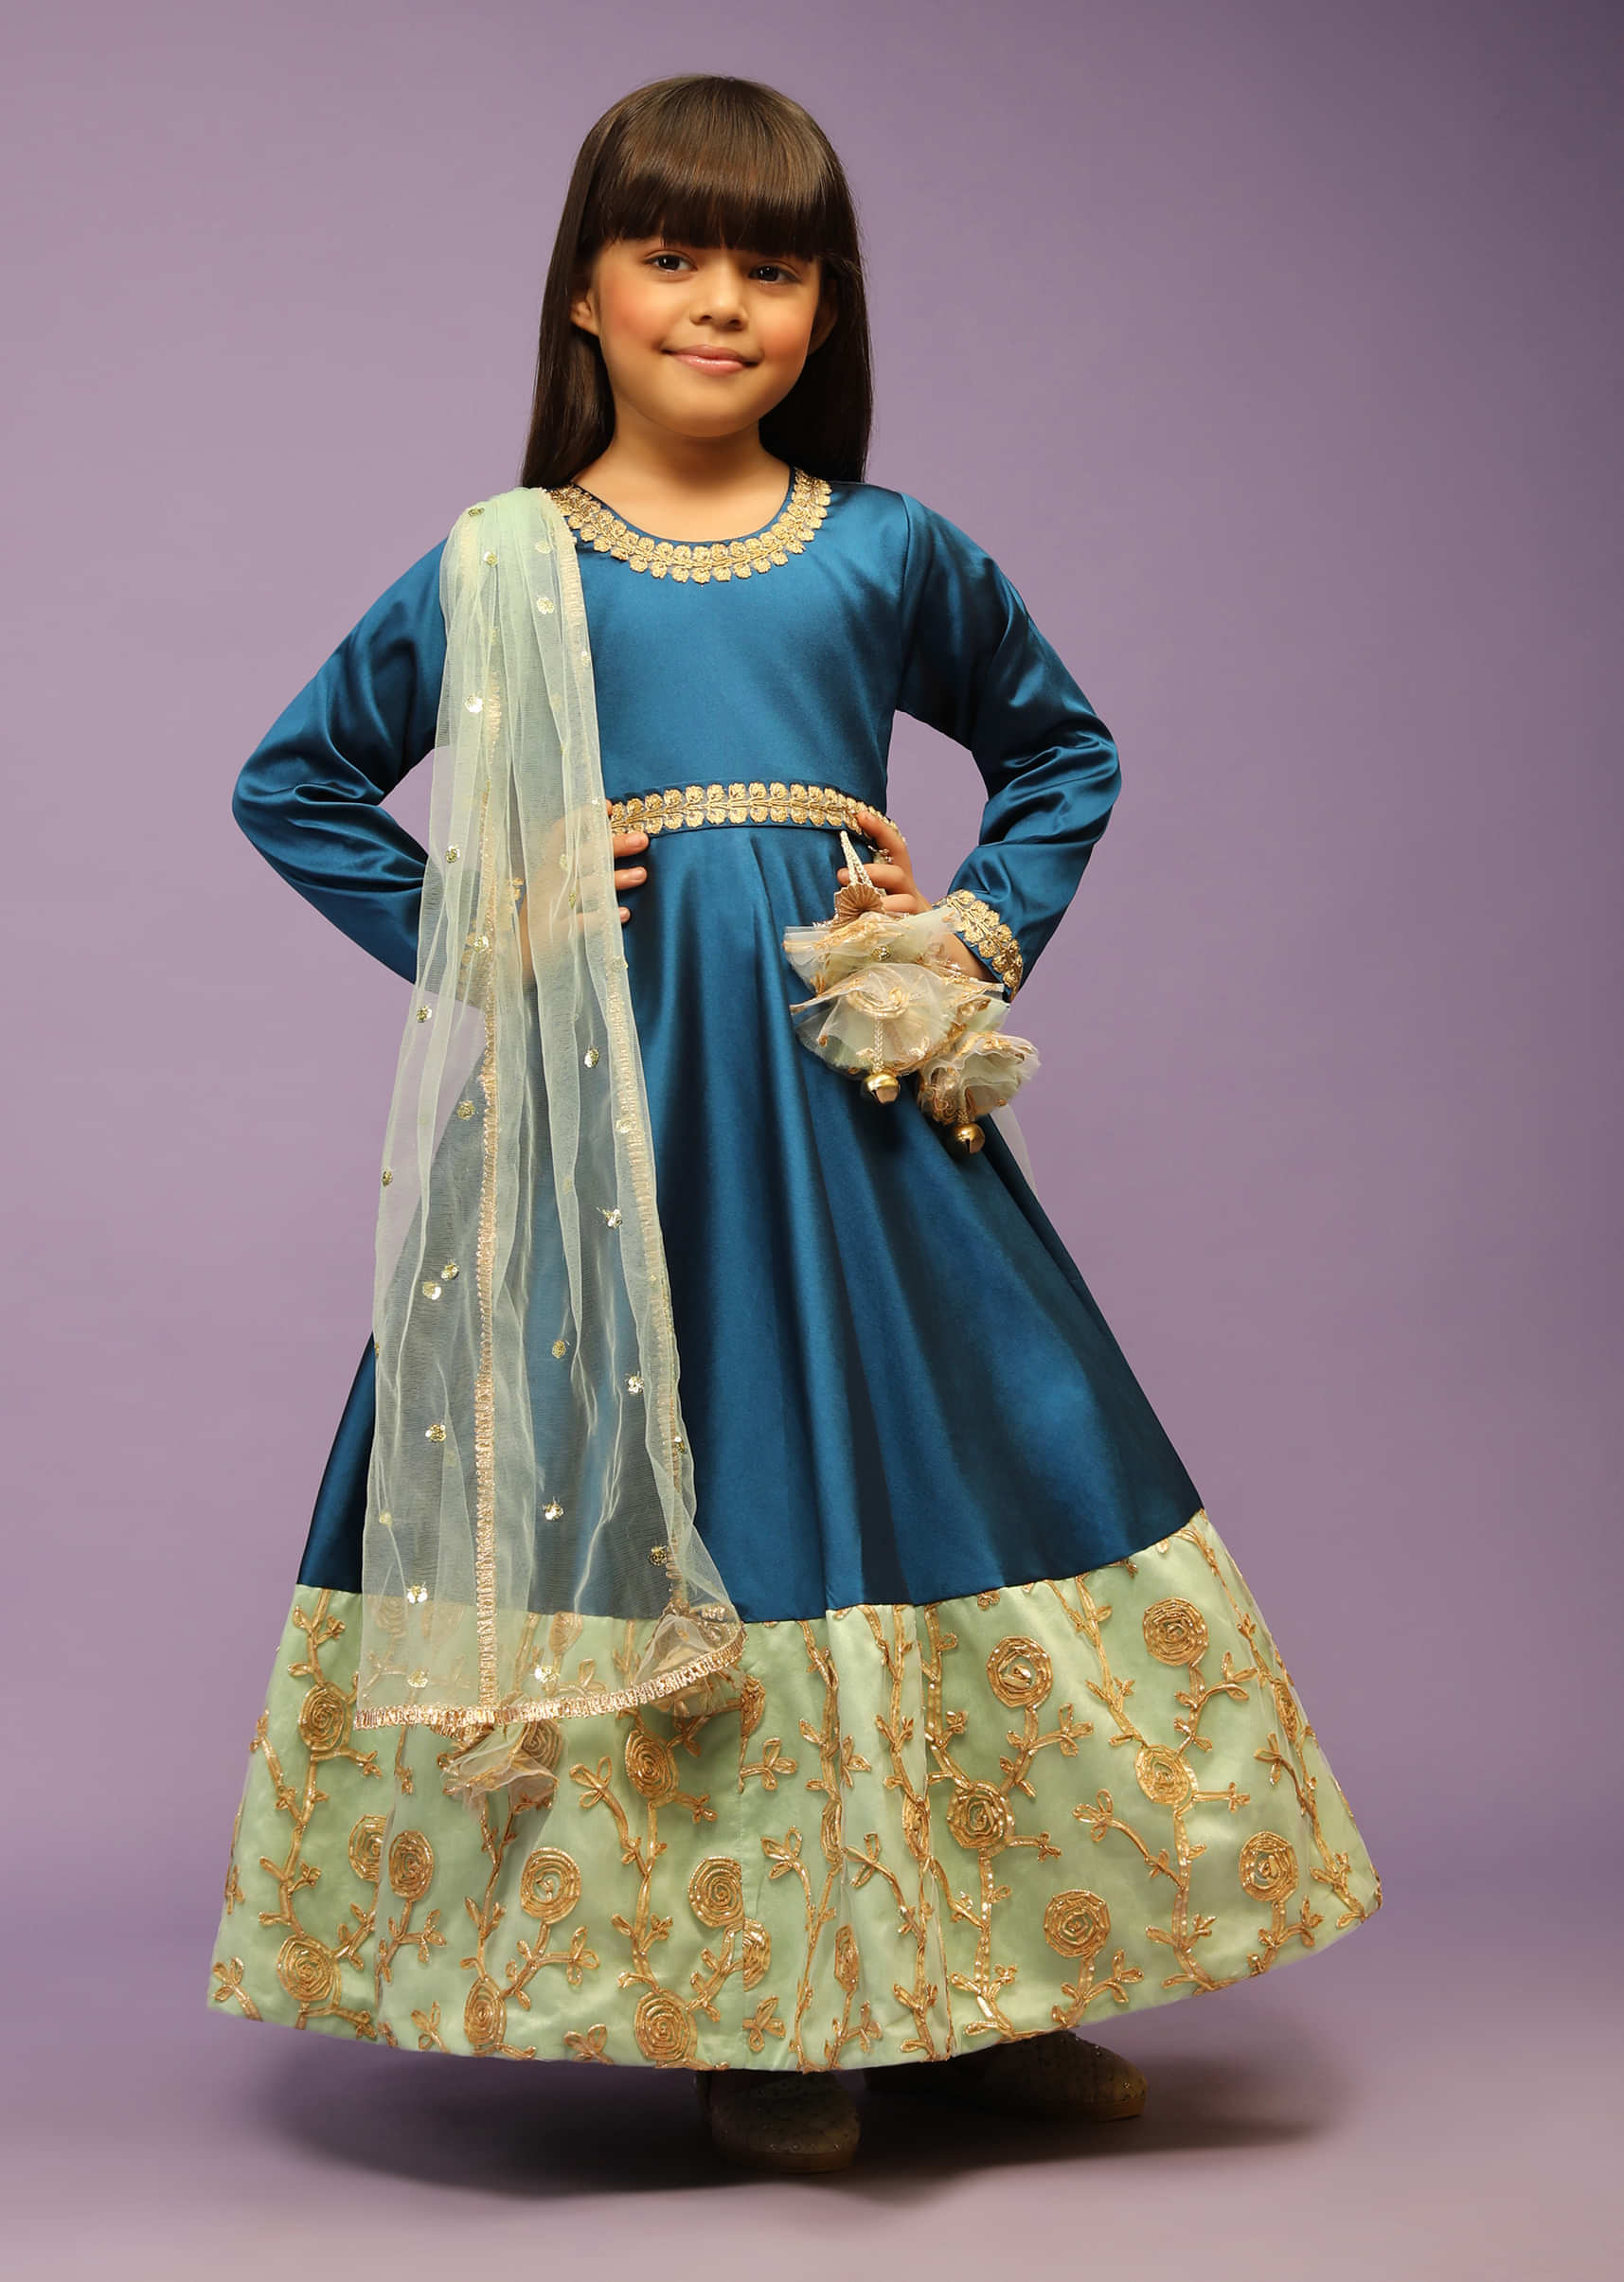 Kalki Girls Teal blue Anarkali gown with green border and intricate lace embroidery by fayon kids